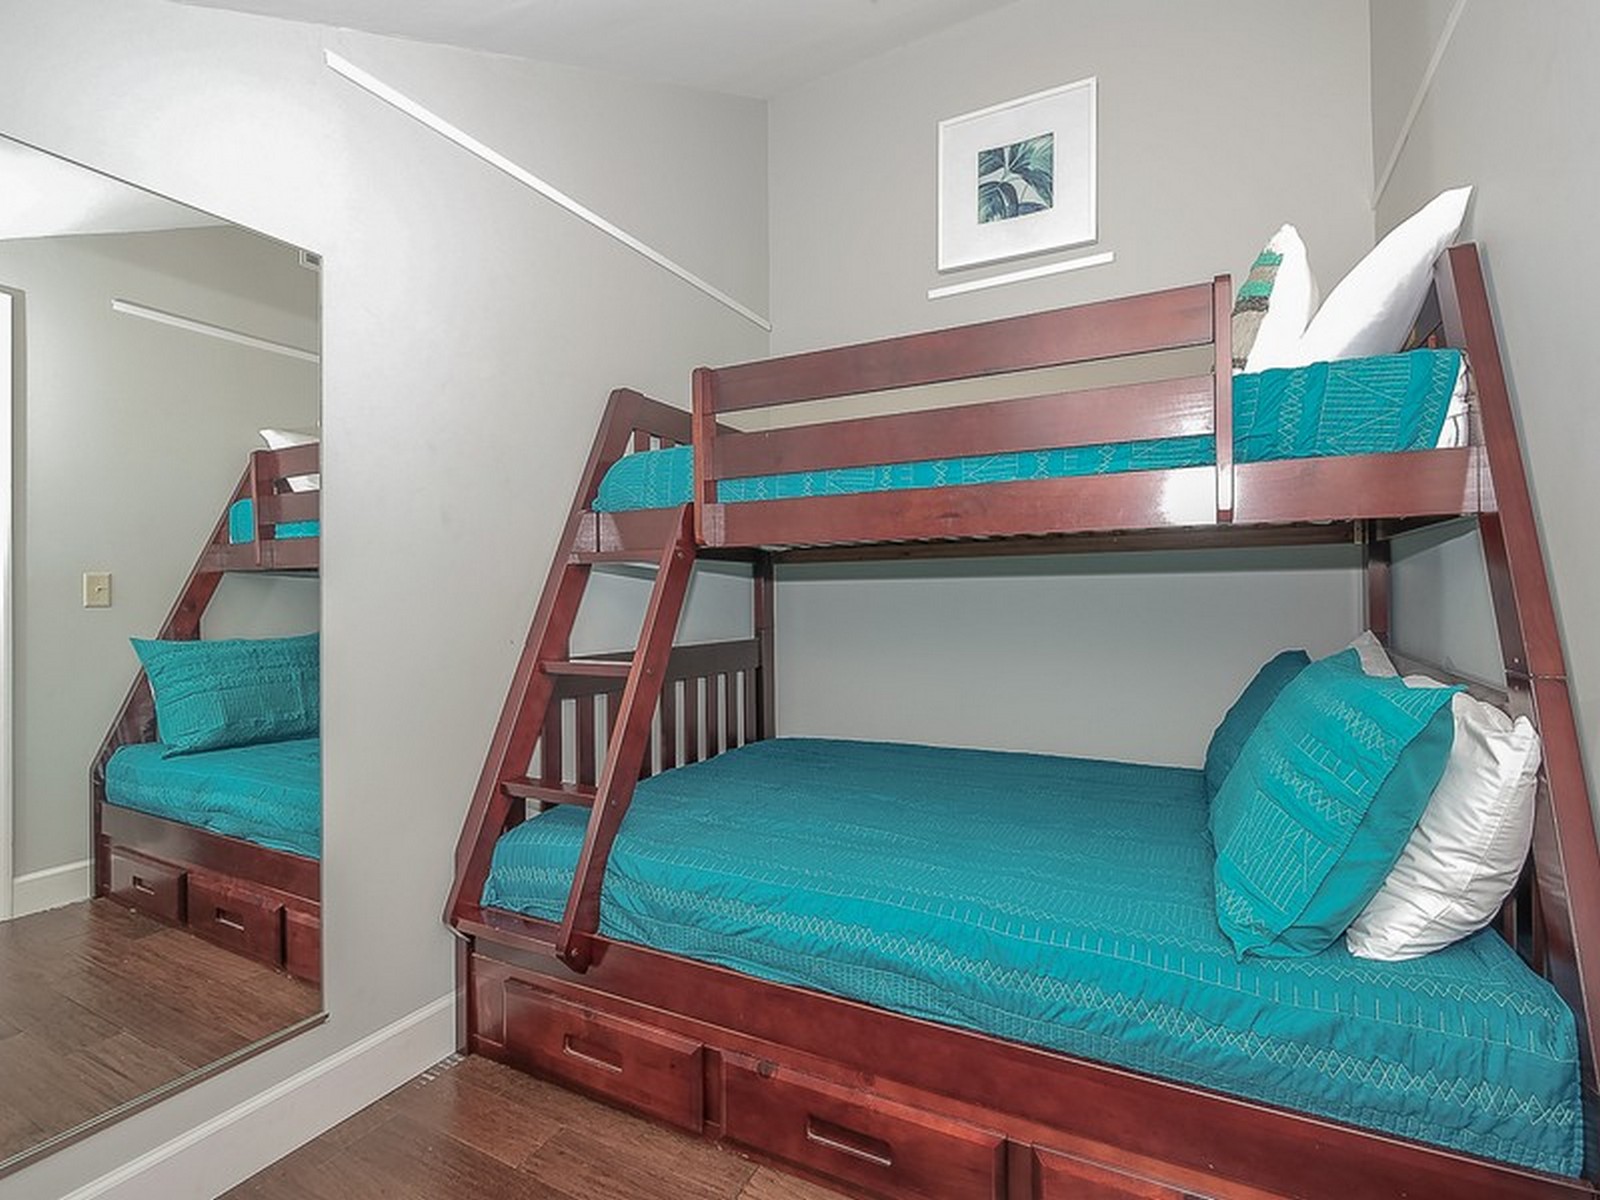 17-South-Live-OakKing-Bedroom-with-Bunk-Beds-2364-big.jpeg